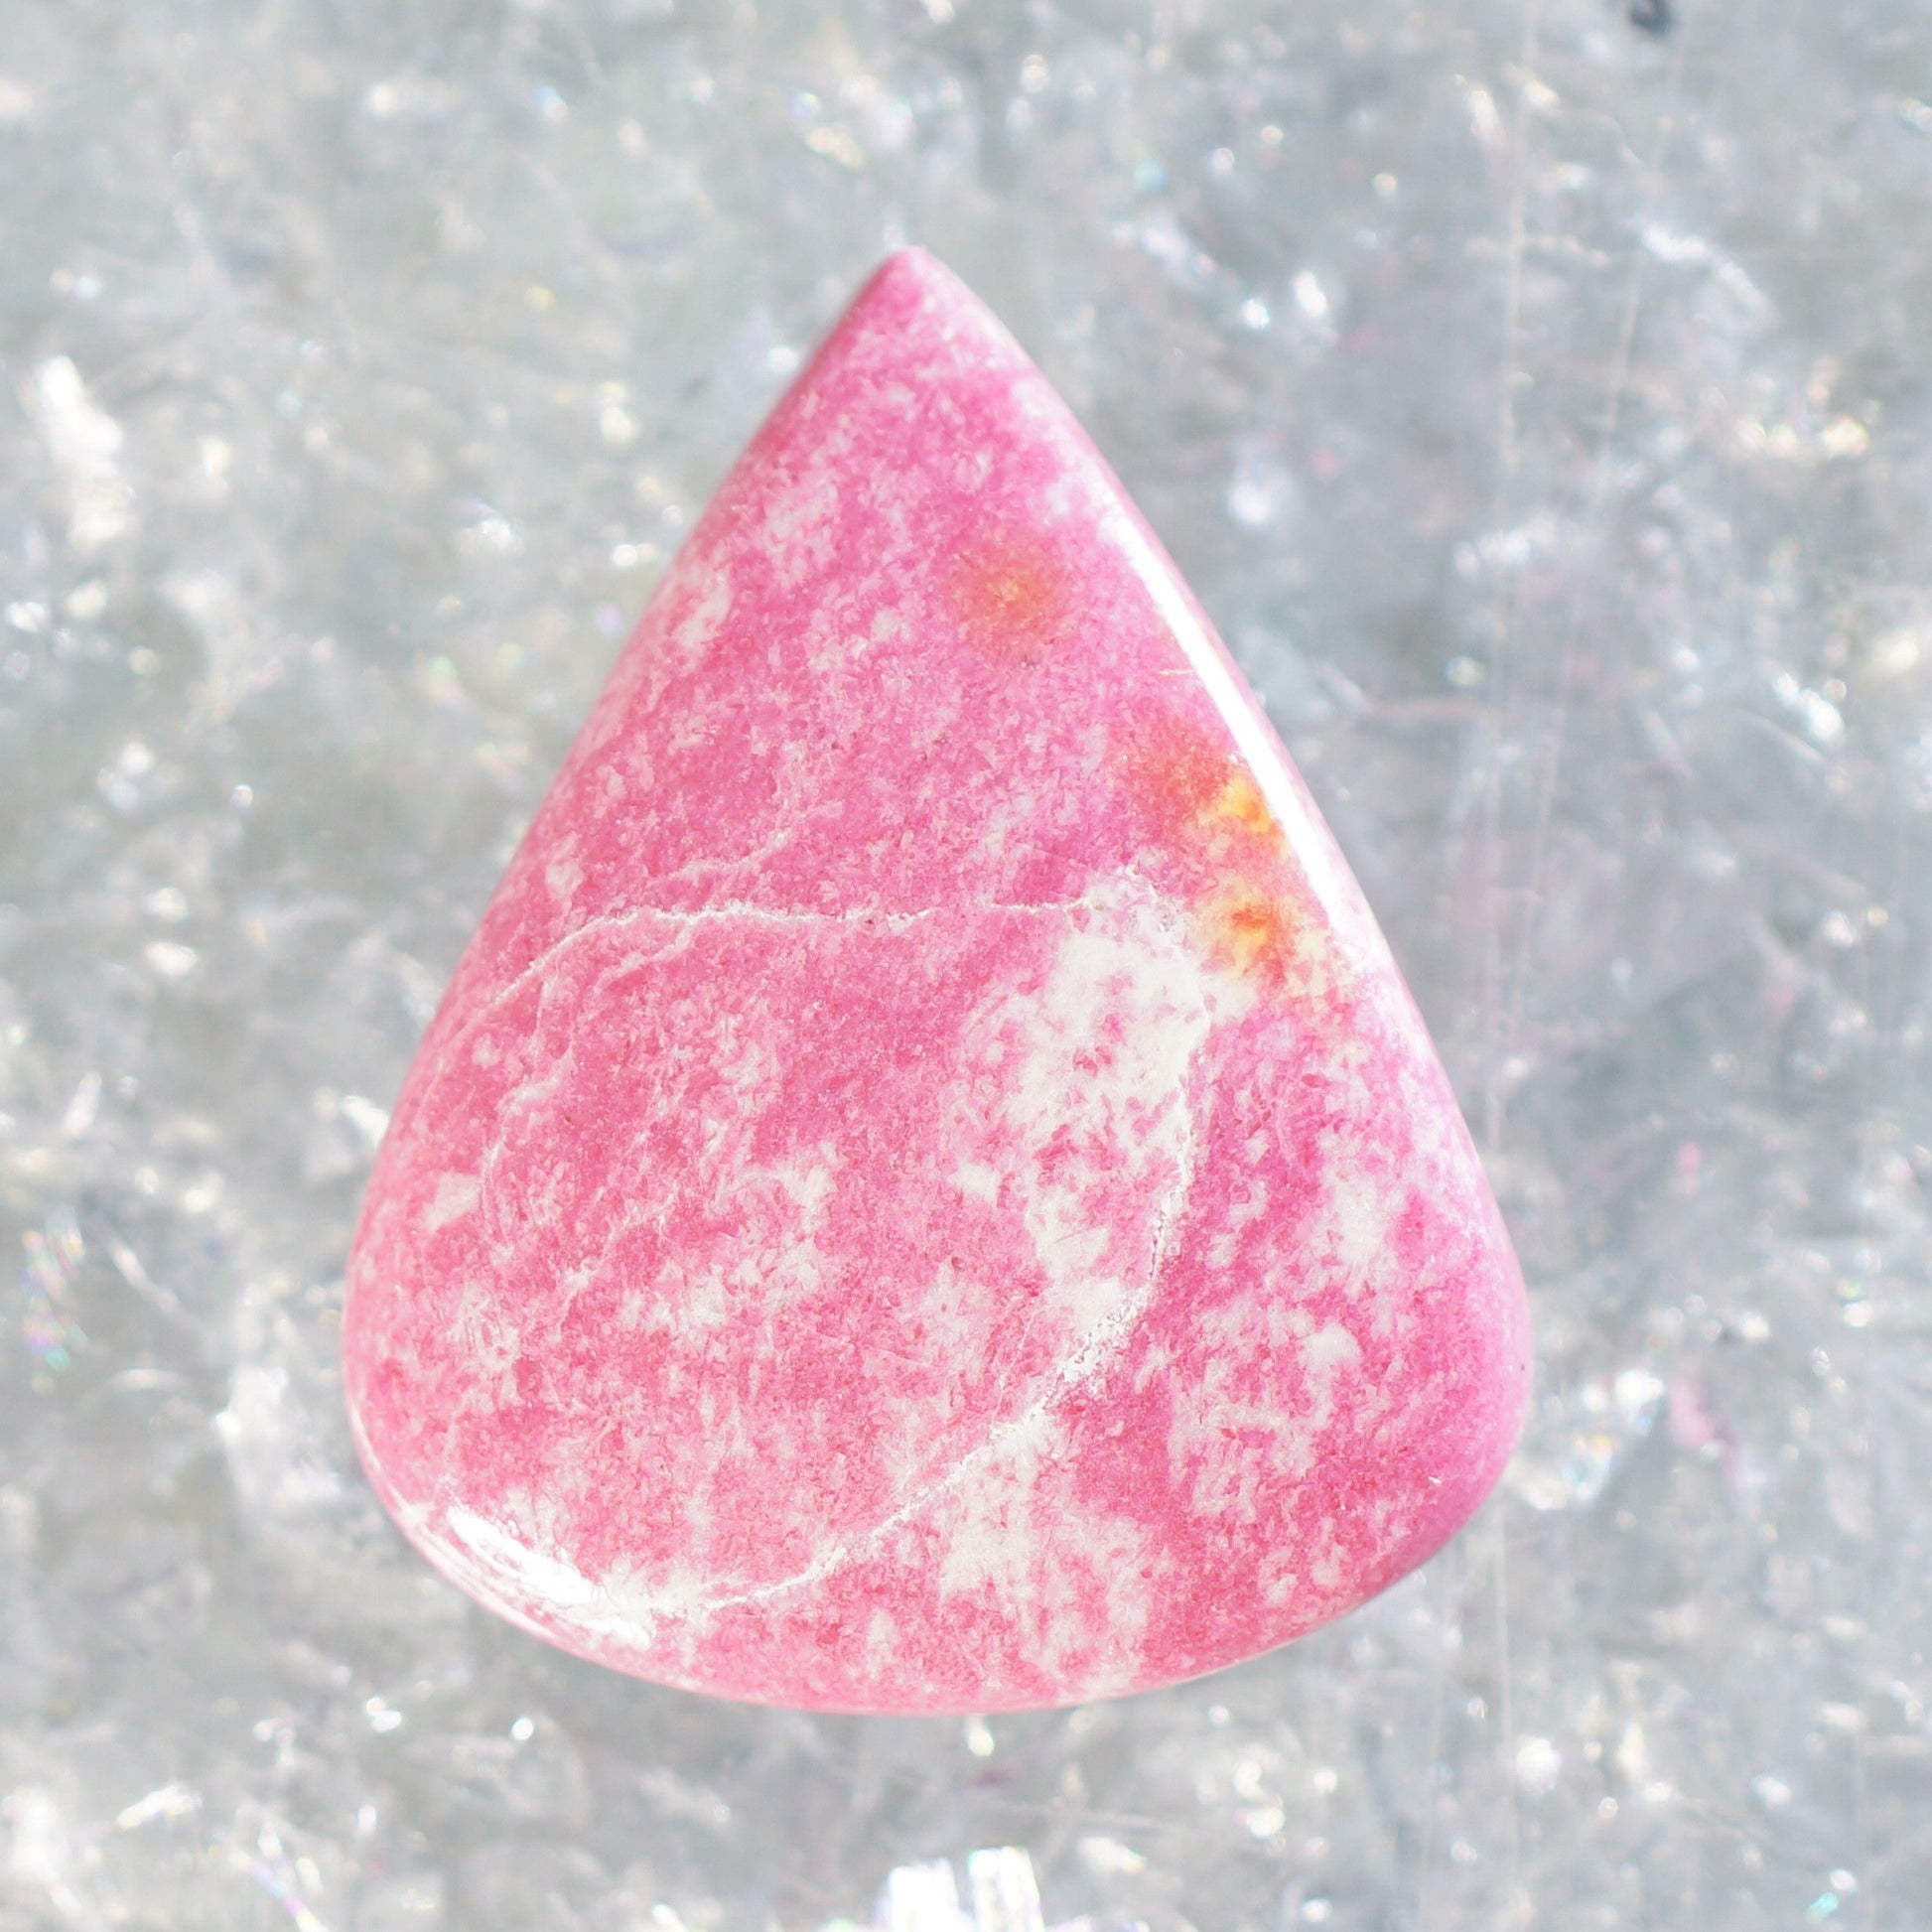 Thulite Cabochon or Cab a wonderful Gemstone Cab for Wire Wrapping or Jewelry Making